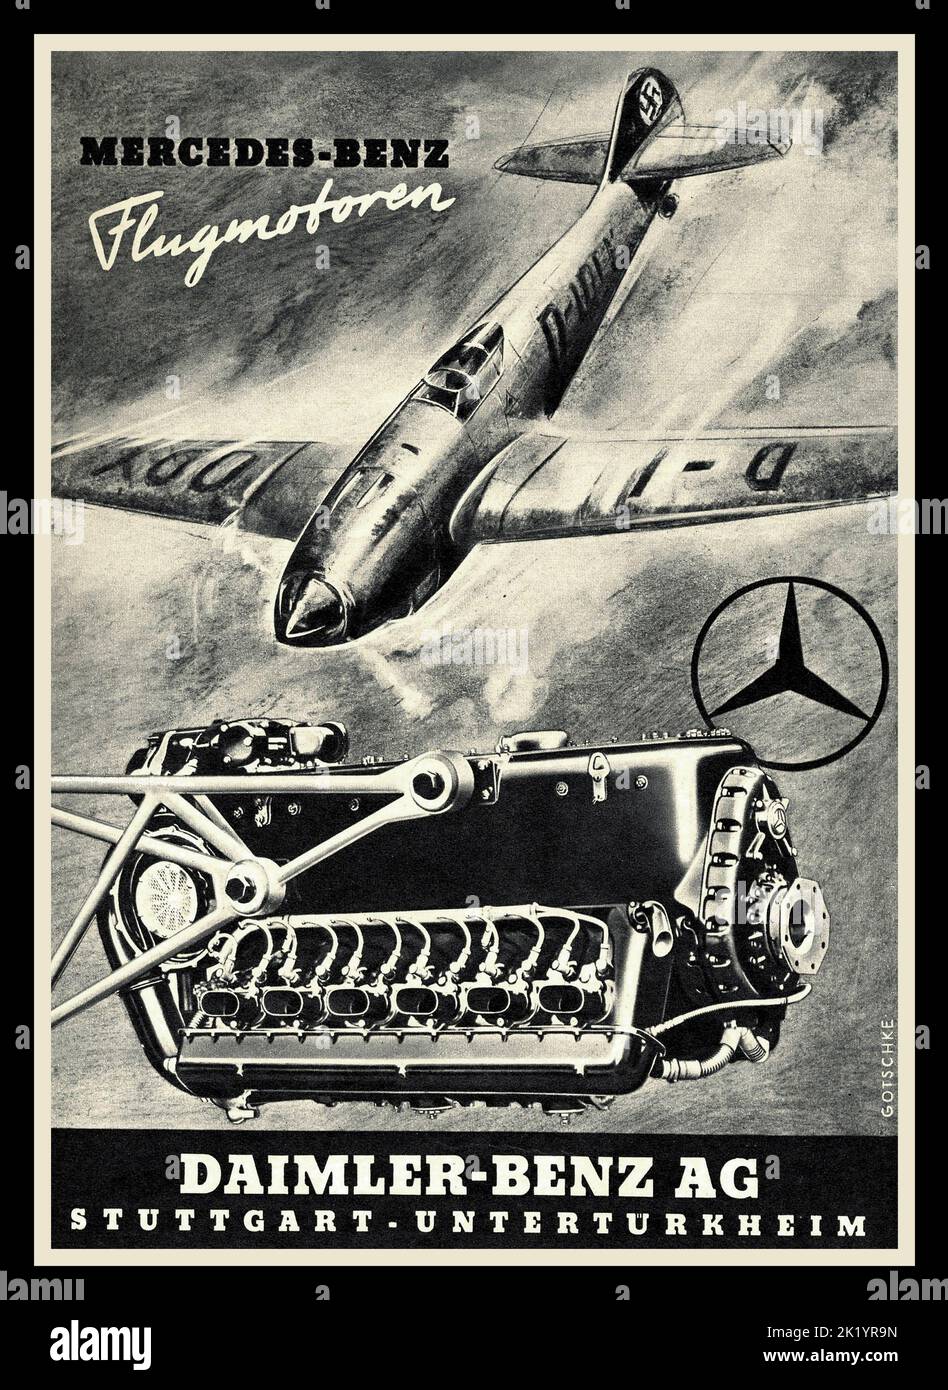 1940s Mercedes WW2 Poster Advertisement for Mercedes aviation engine in Nazi Germany fighter plane ME109 with Swastika tail fin. 'Flugmotoren'  Mercedes-Benz Stuttgart - Unterturkheim Nazi Germany World War II Second World War  The Messerschmitt Bf 109 is a German World War II fighter aircraft that was, along with the Focke-Wulf Fw 190, the backbone of the Luftwaffe's fighter force. The Bf 109 first saw operational service in 1937 during the Spanish Civil War and was still in service at the end of World War II in 1945. The DB-600 engine first produced in November 1937. Stock Photo